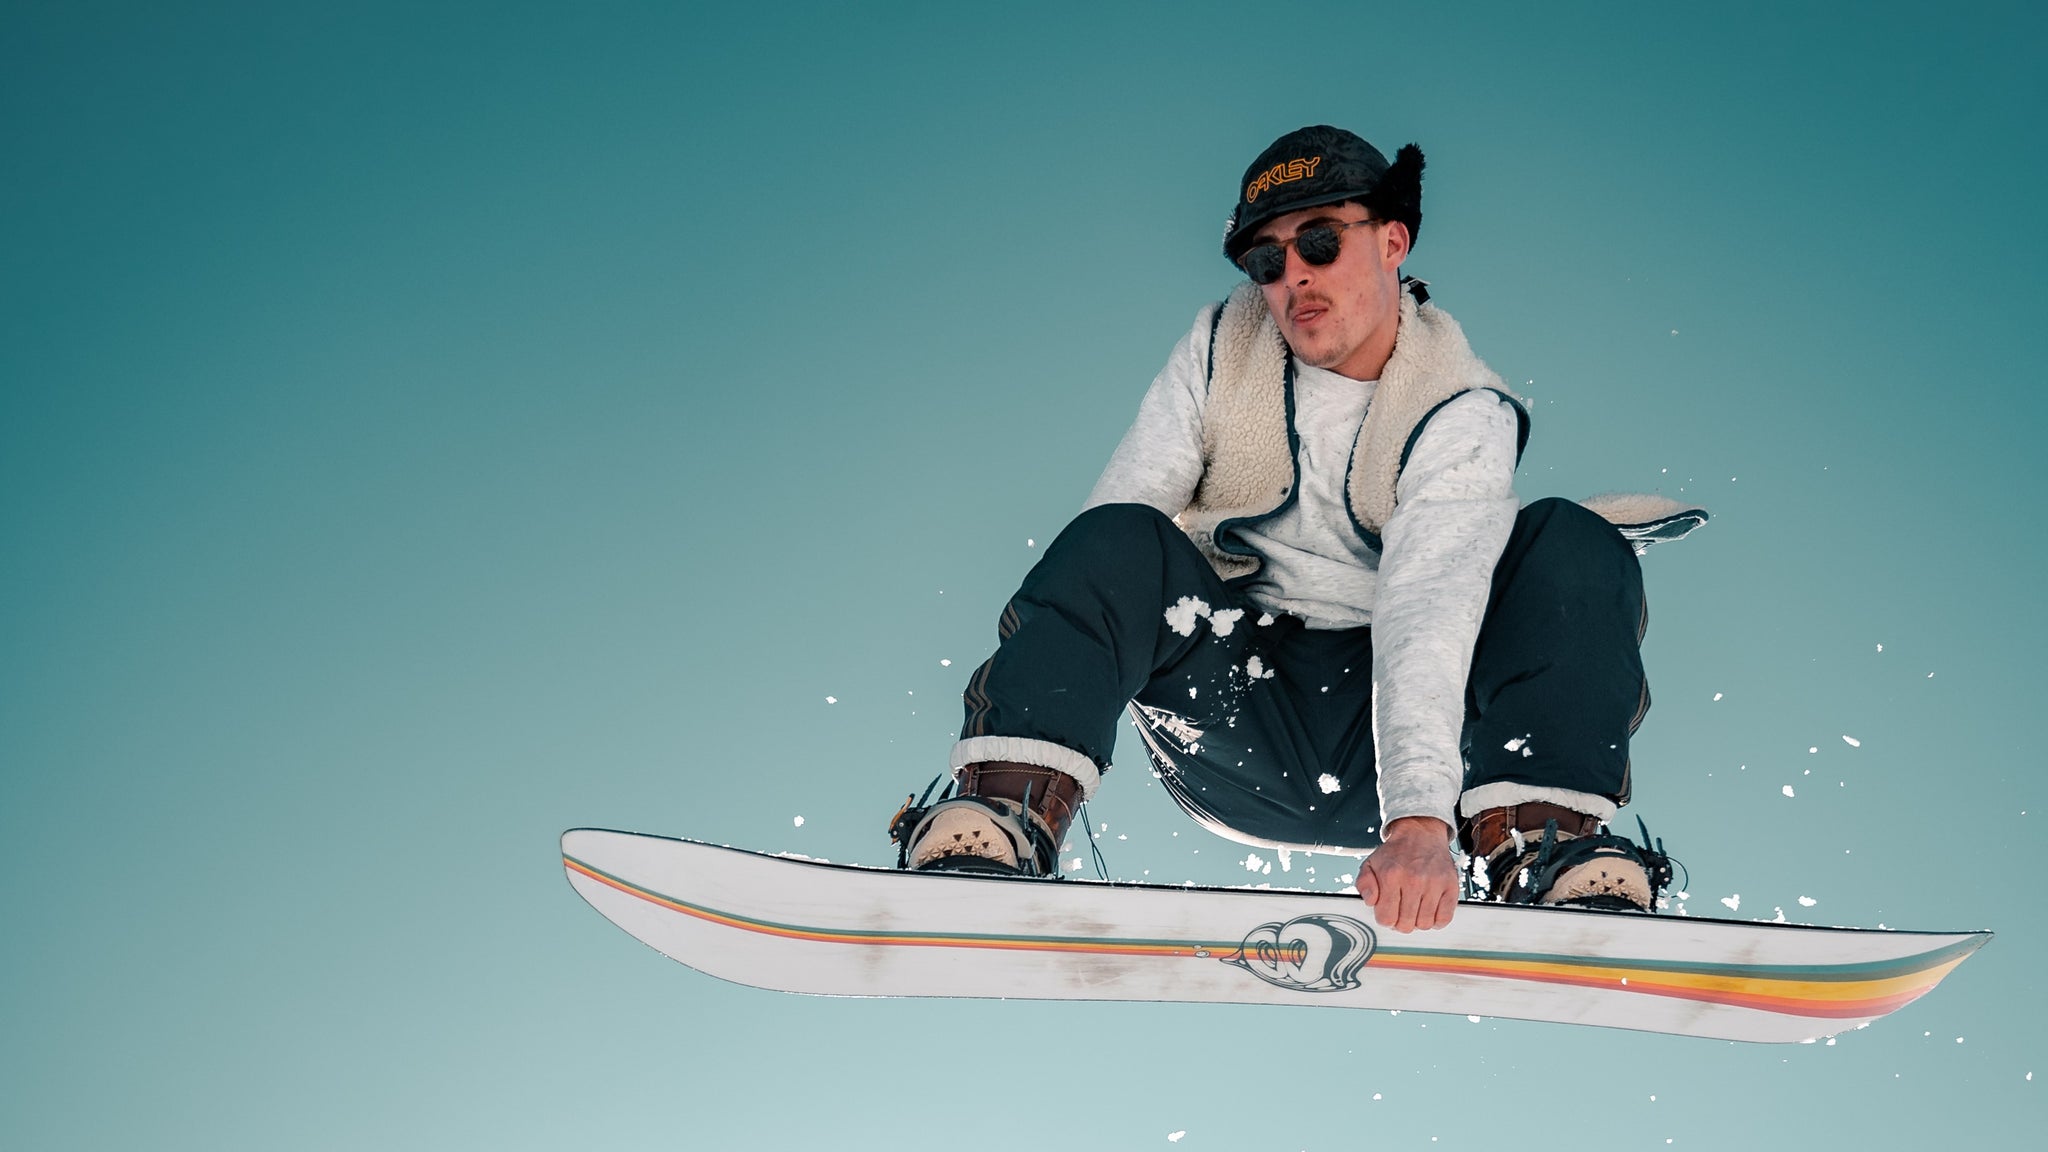 5 Beginner Tricks Every Snowboarder Should Learn First